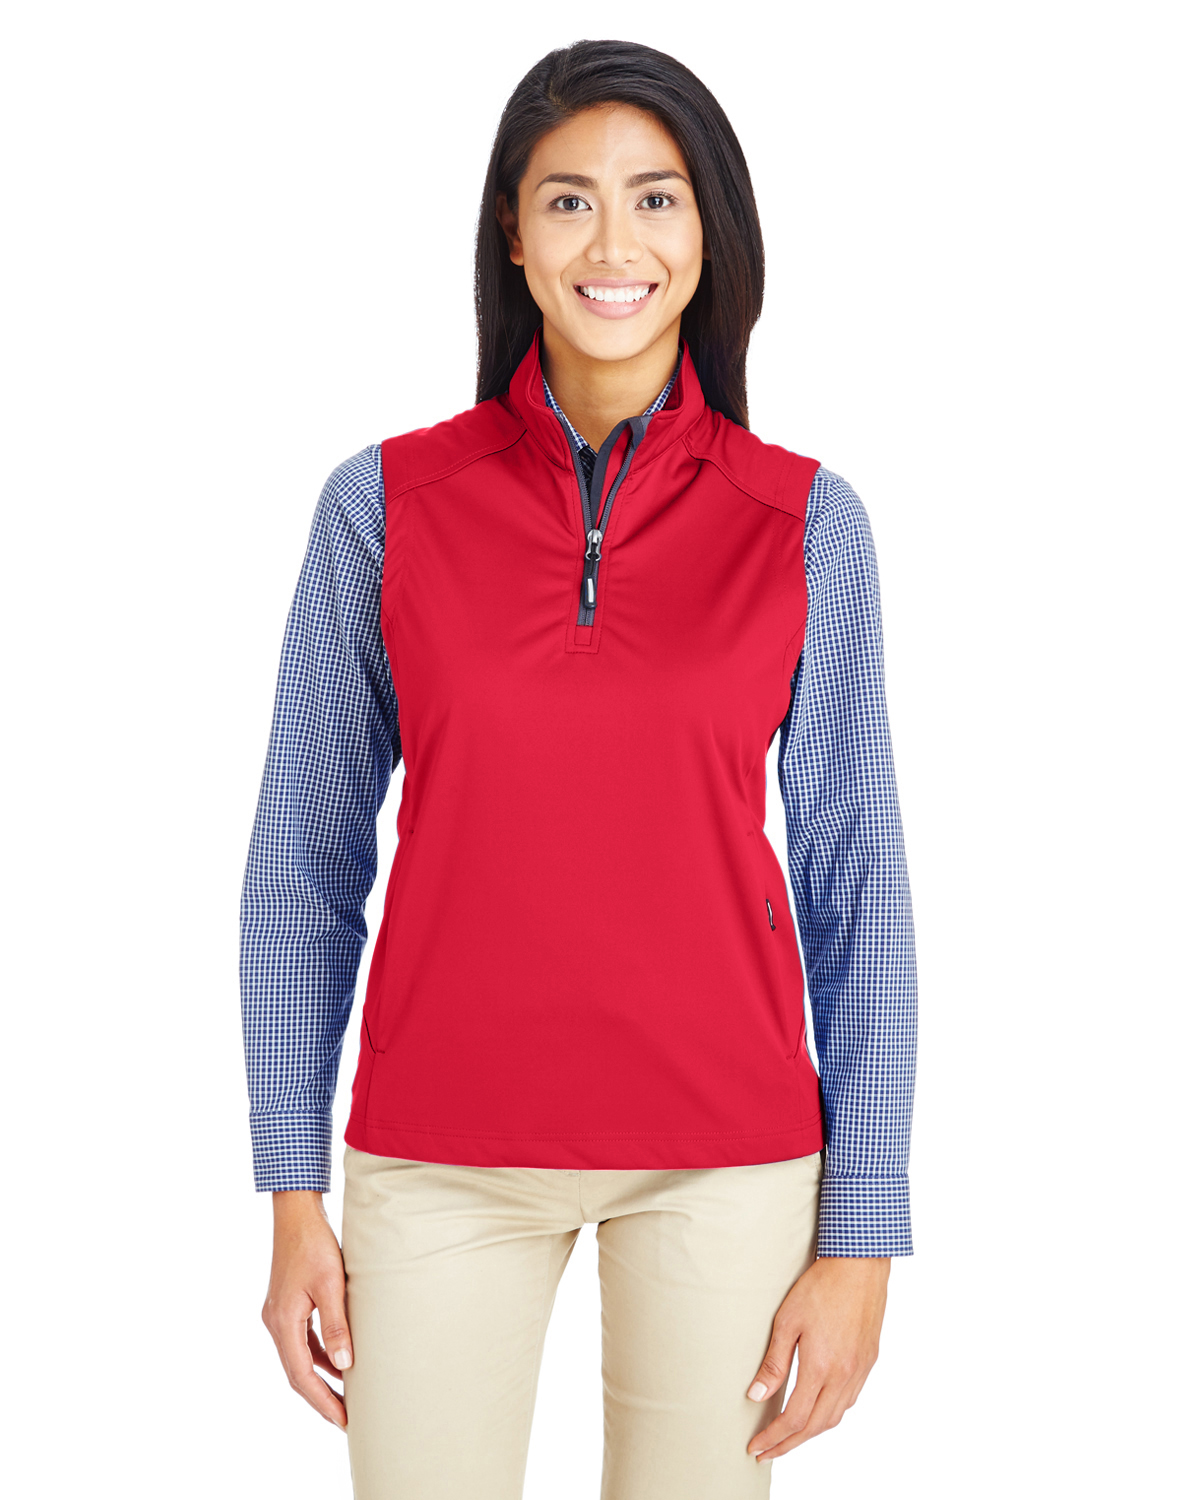 Ladies' Techno Lite Three-Layer Knit Tech-Shell Quarter-Zip Vest - CLASSIC RED - S - image 1 of 3